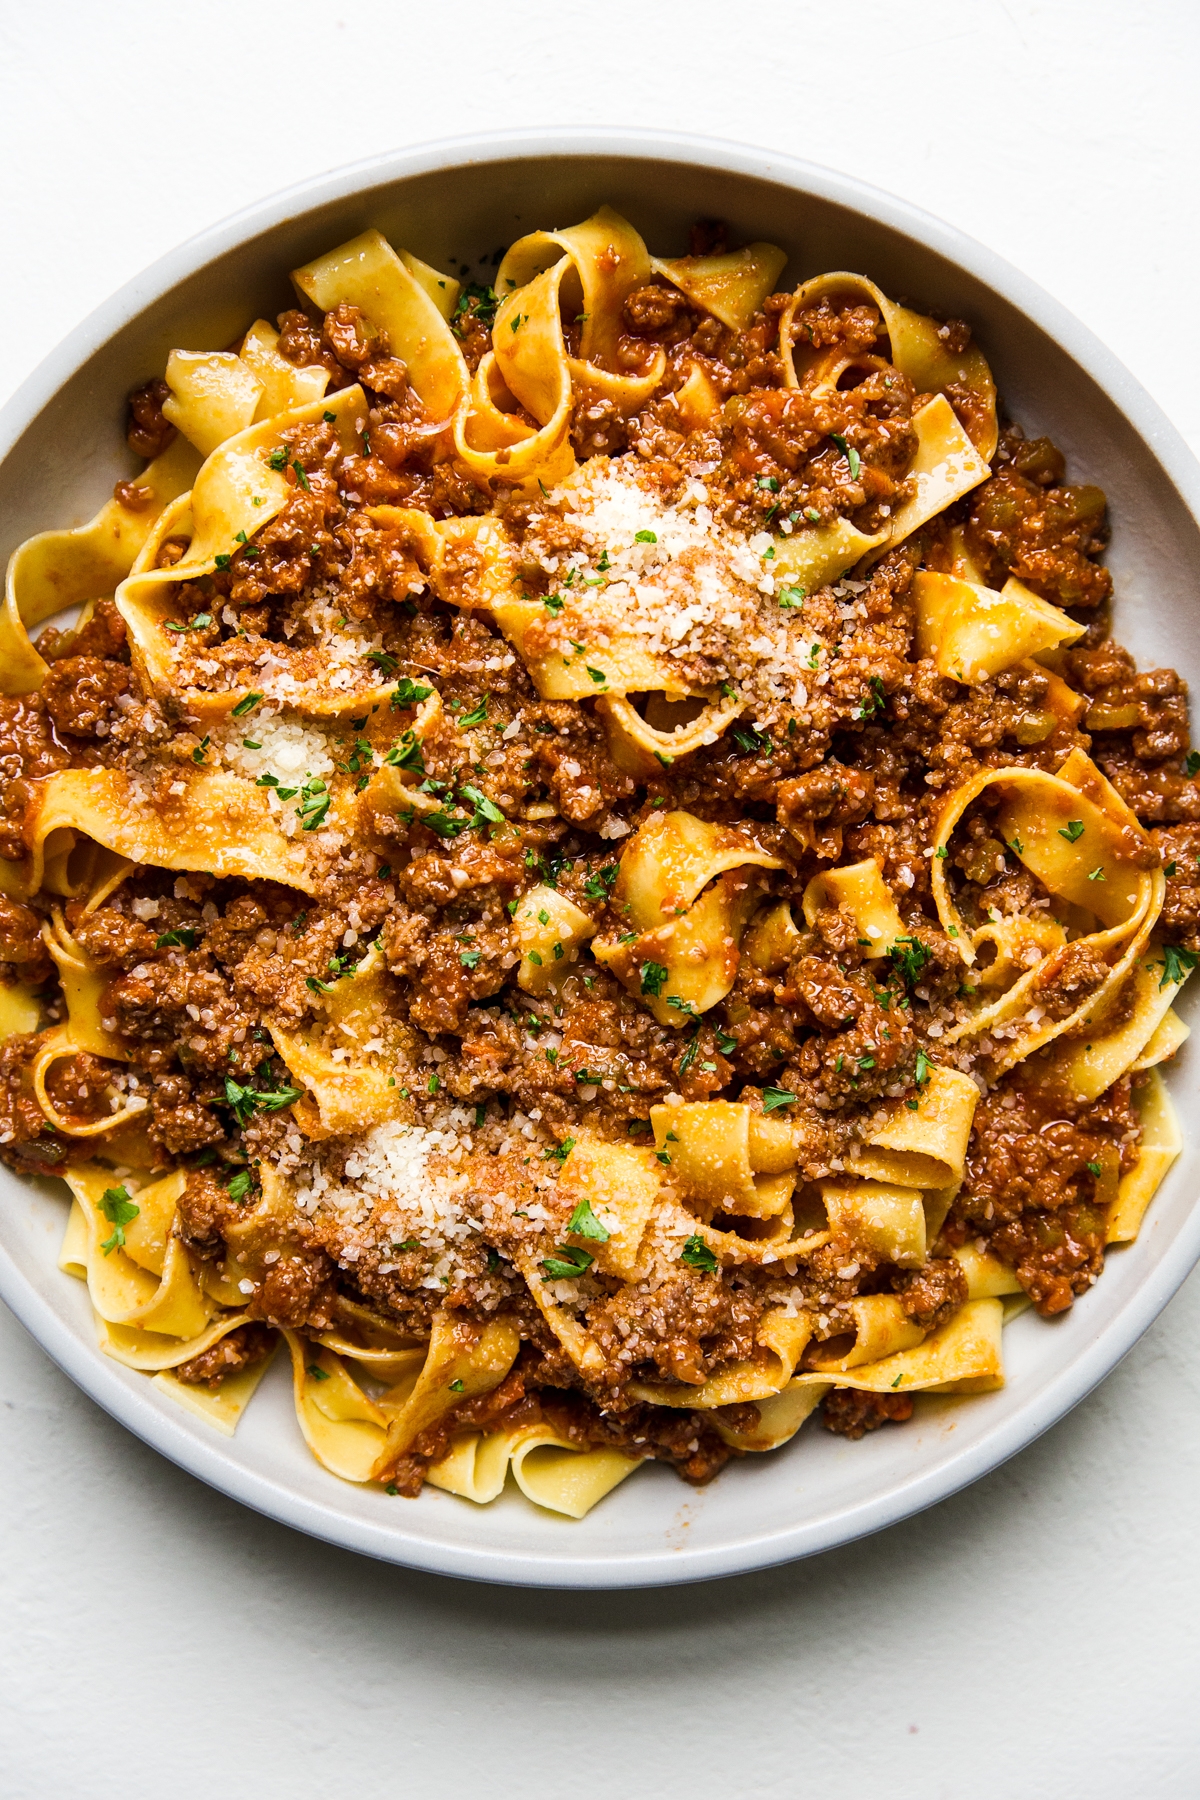 Beef and Pork Bolognese with Pasta Recipe | The Feedfeed